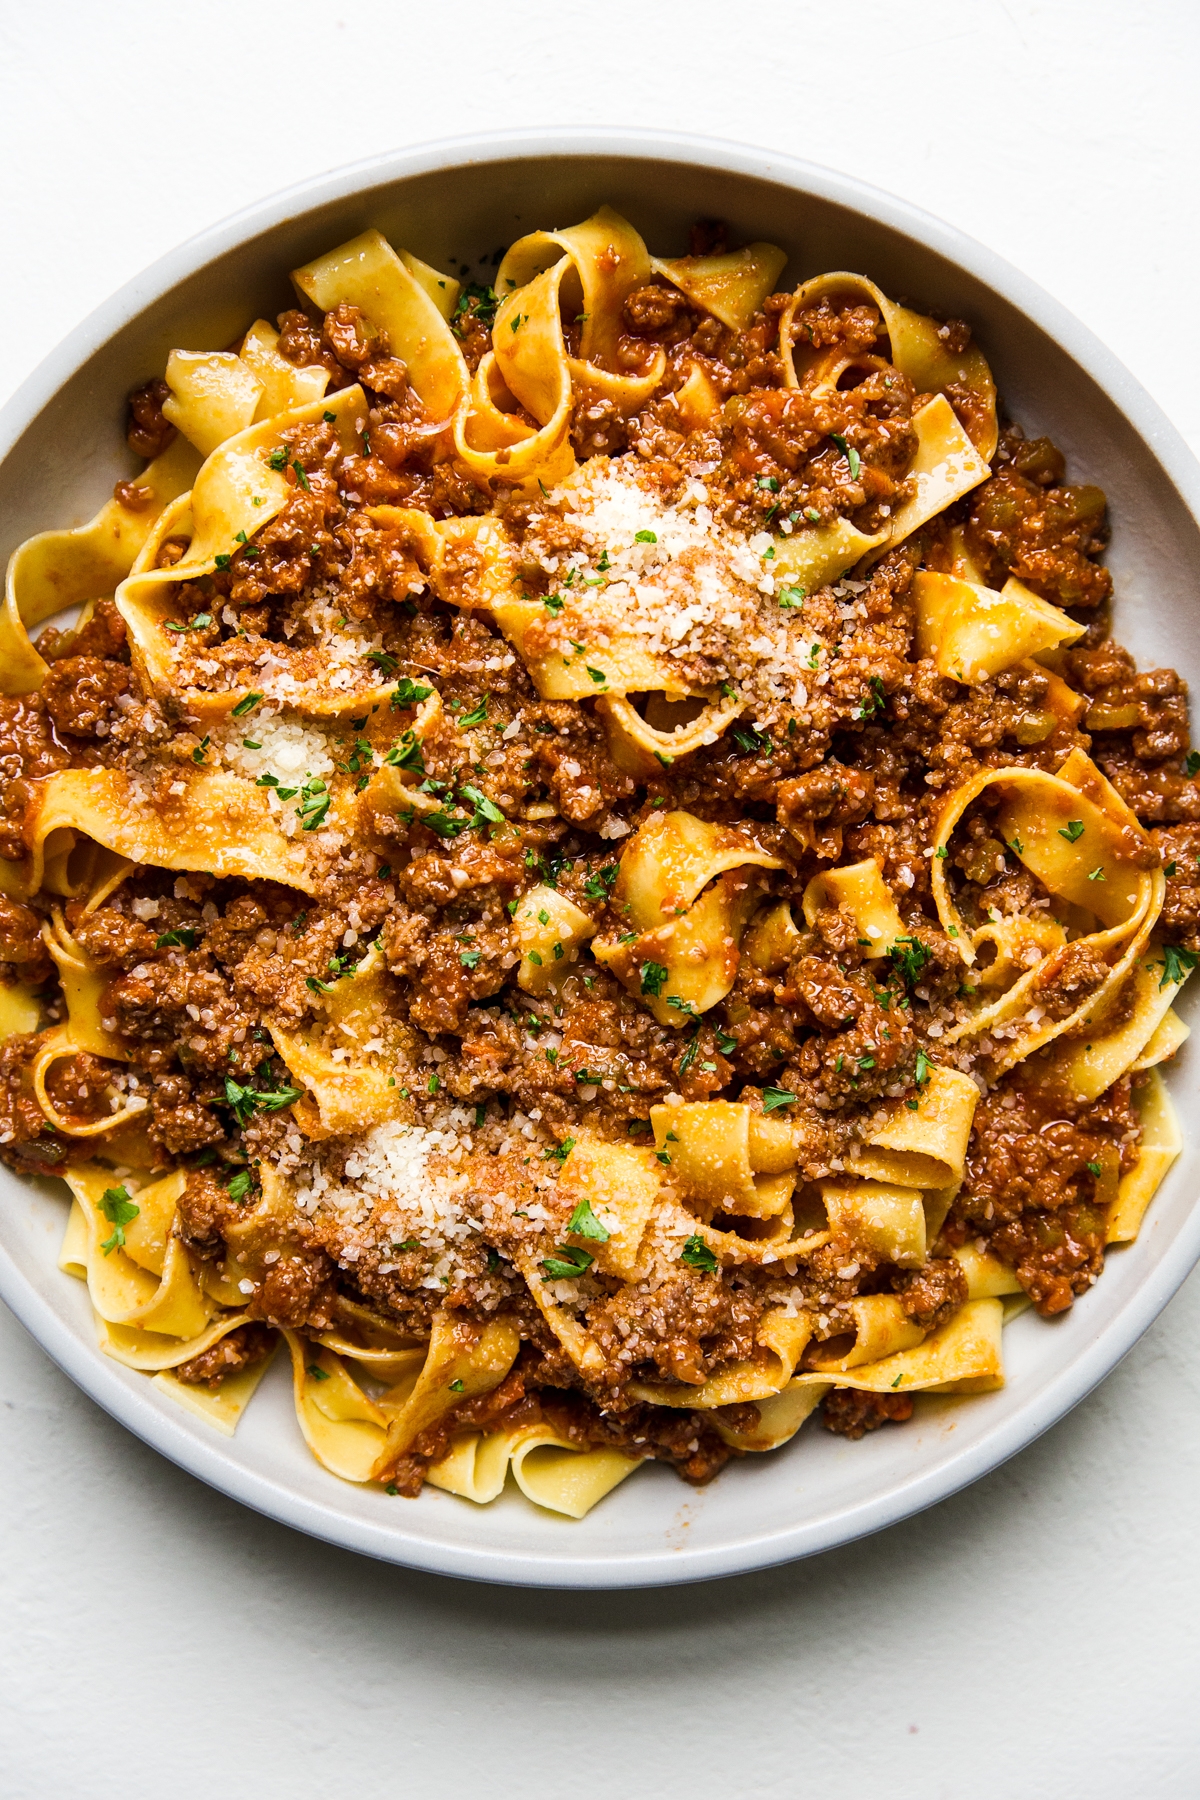 Beef and Pork Bolognese with Pasta Recipe | The Feedfeed